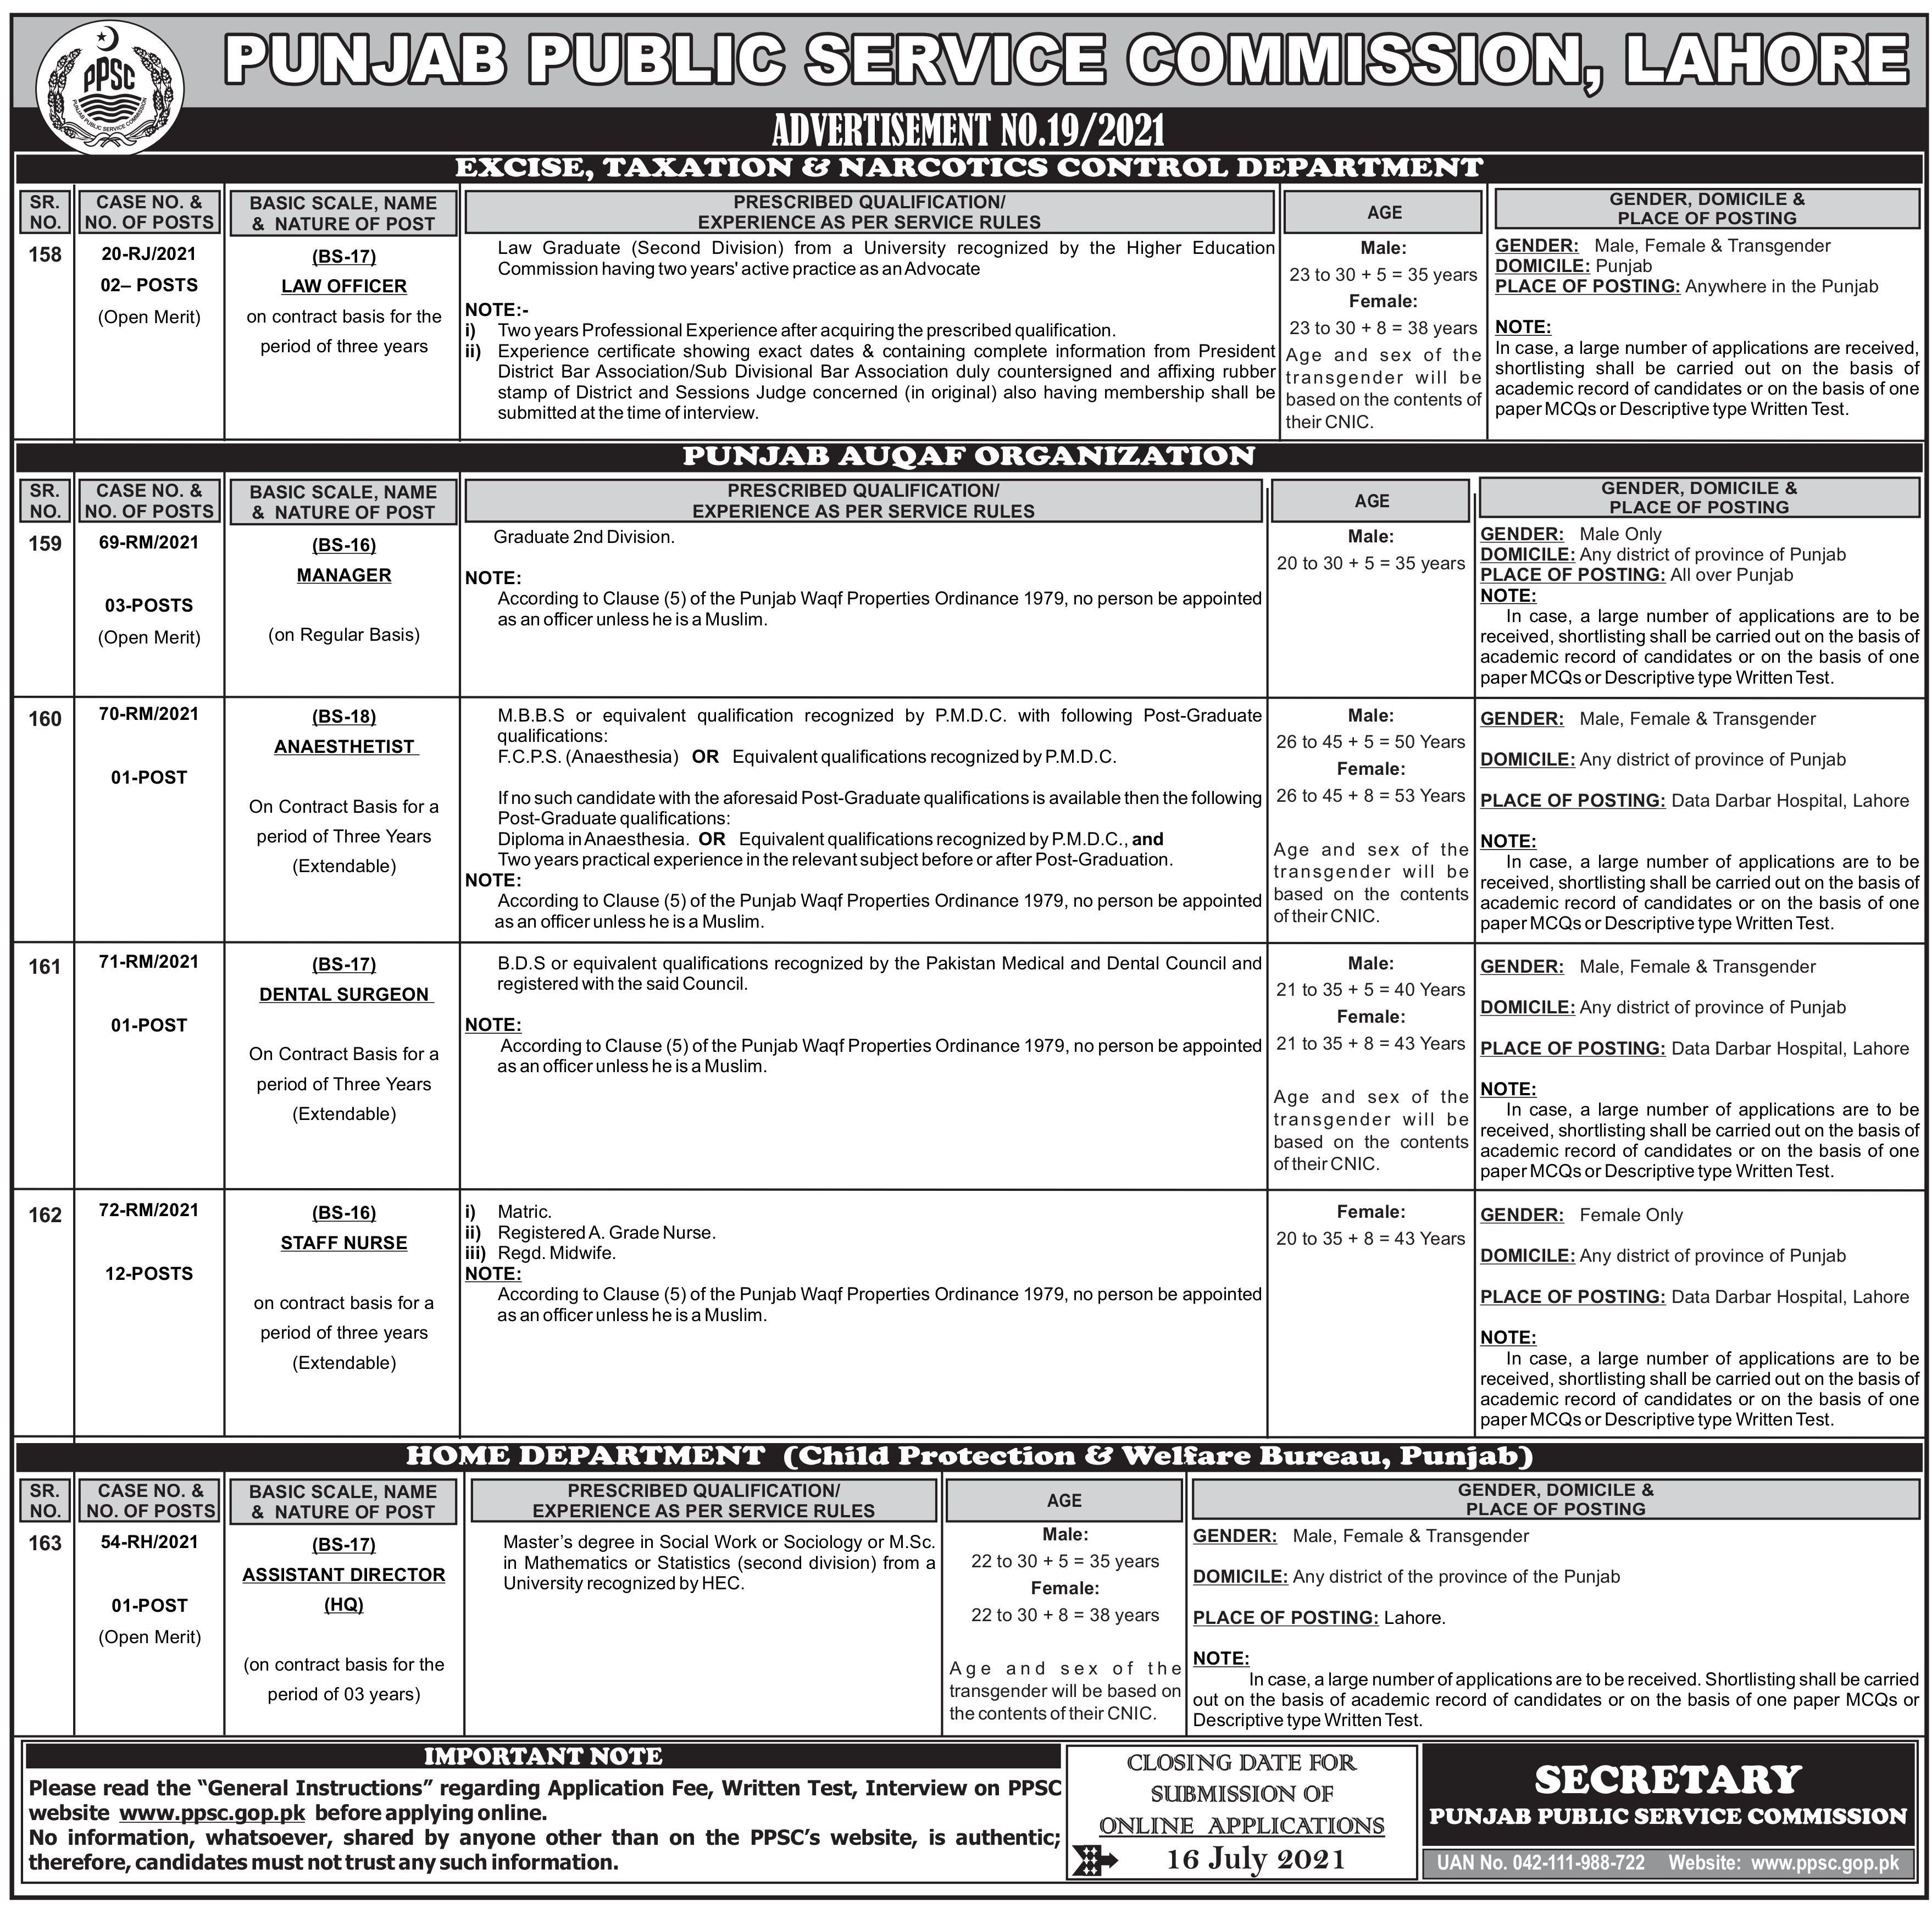 PPSC Jobs July 2021 Advertisement Apply Now